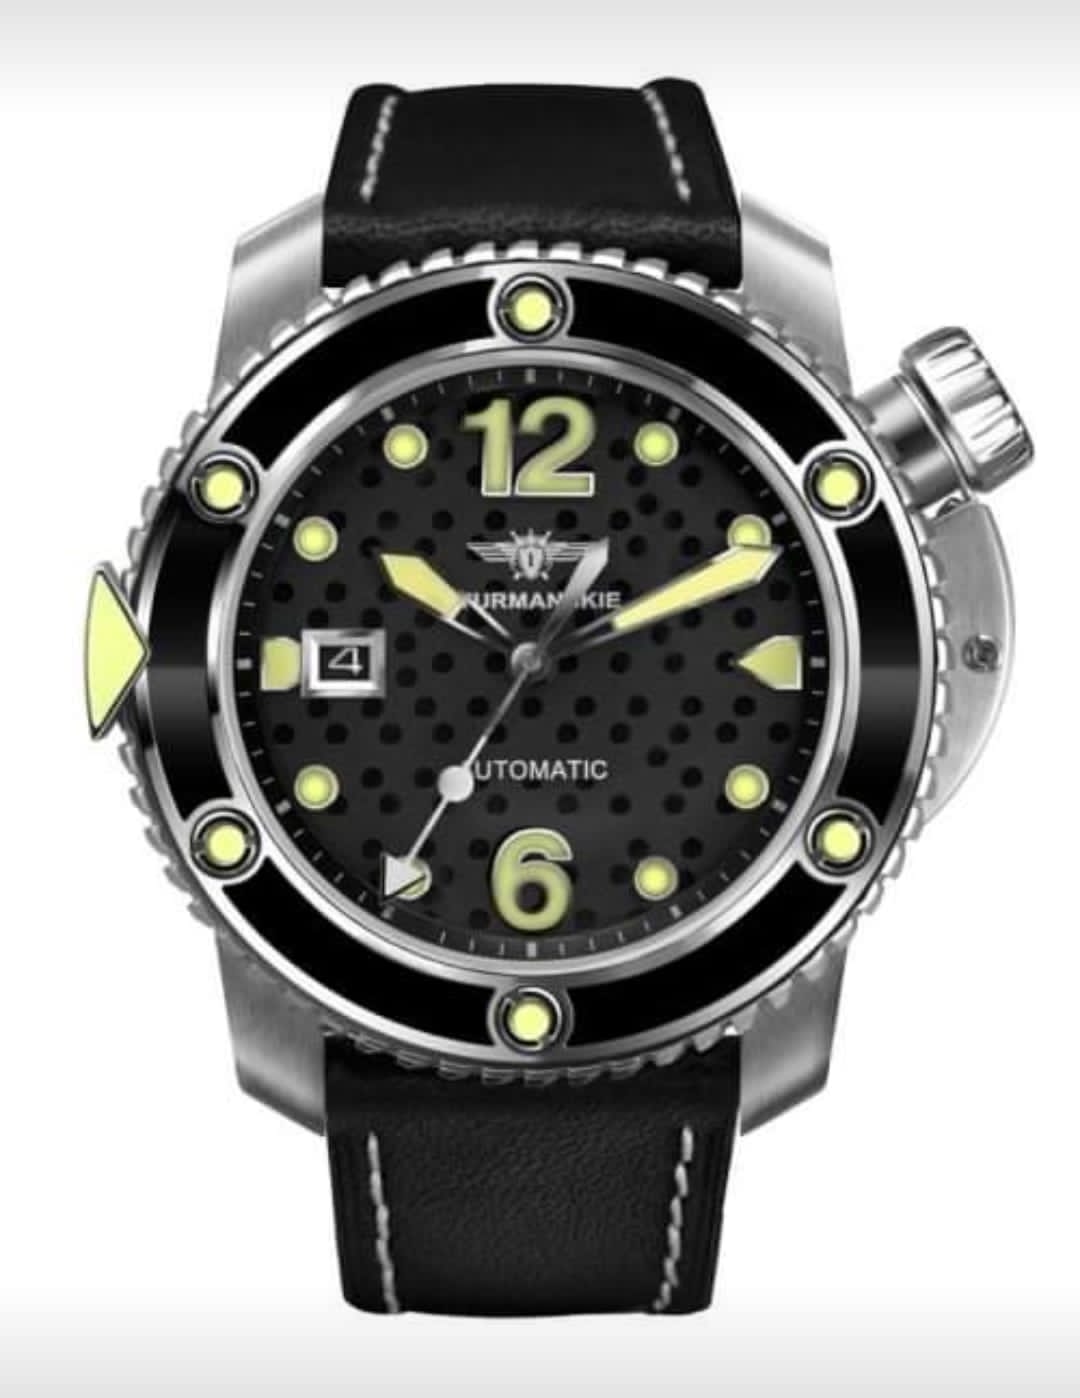 Pre-Owned Sturmanskie Stingray 300 Meter Professional Dive Watch Automatic NH35/1825893